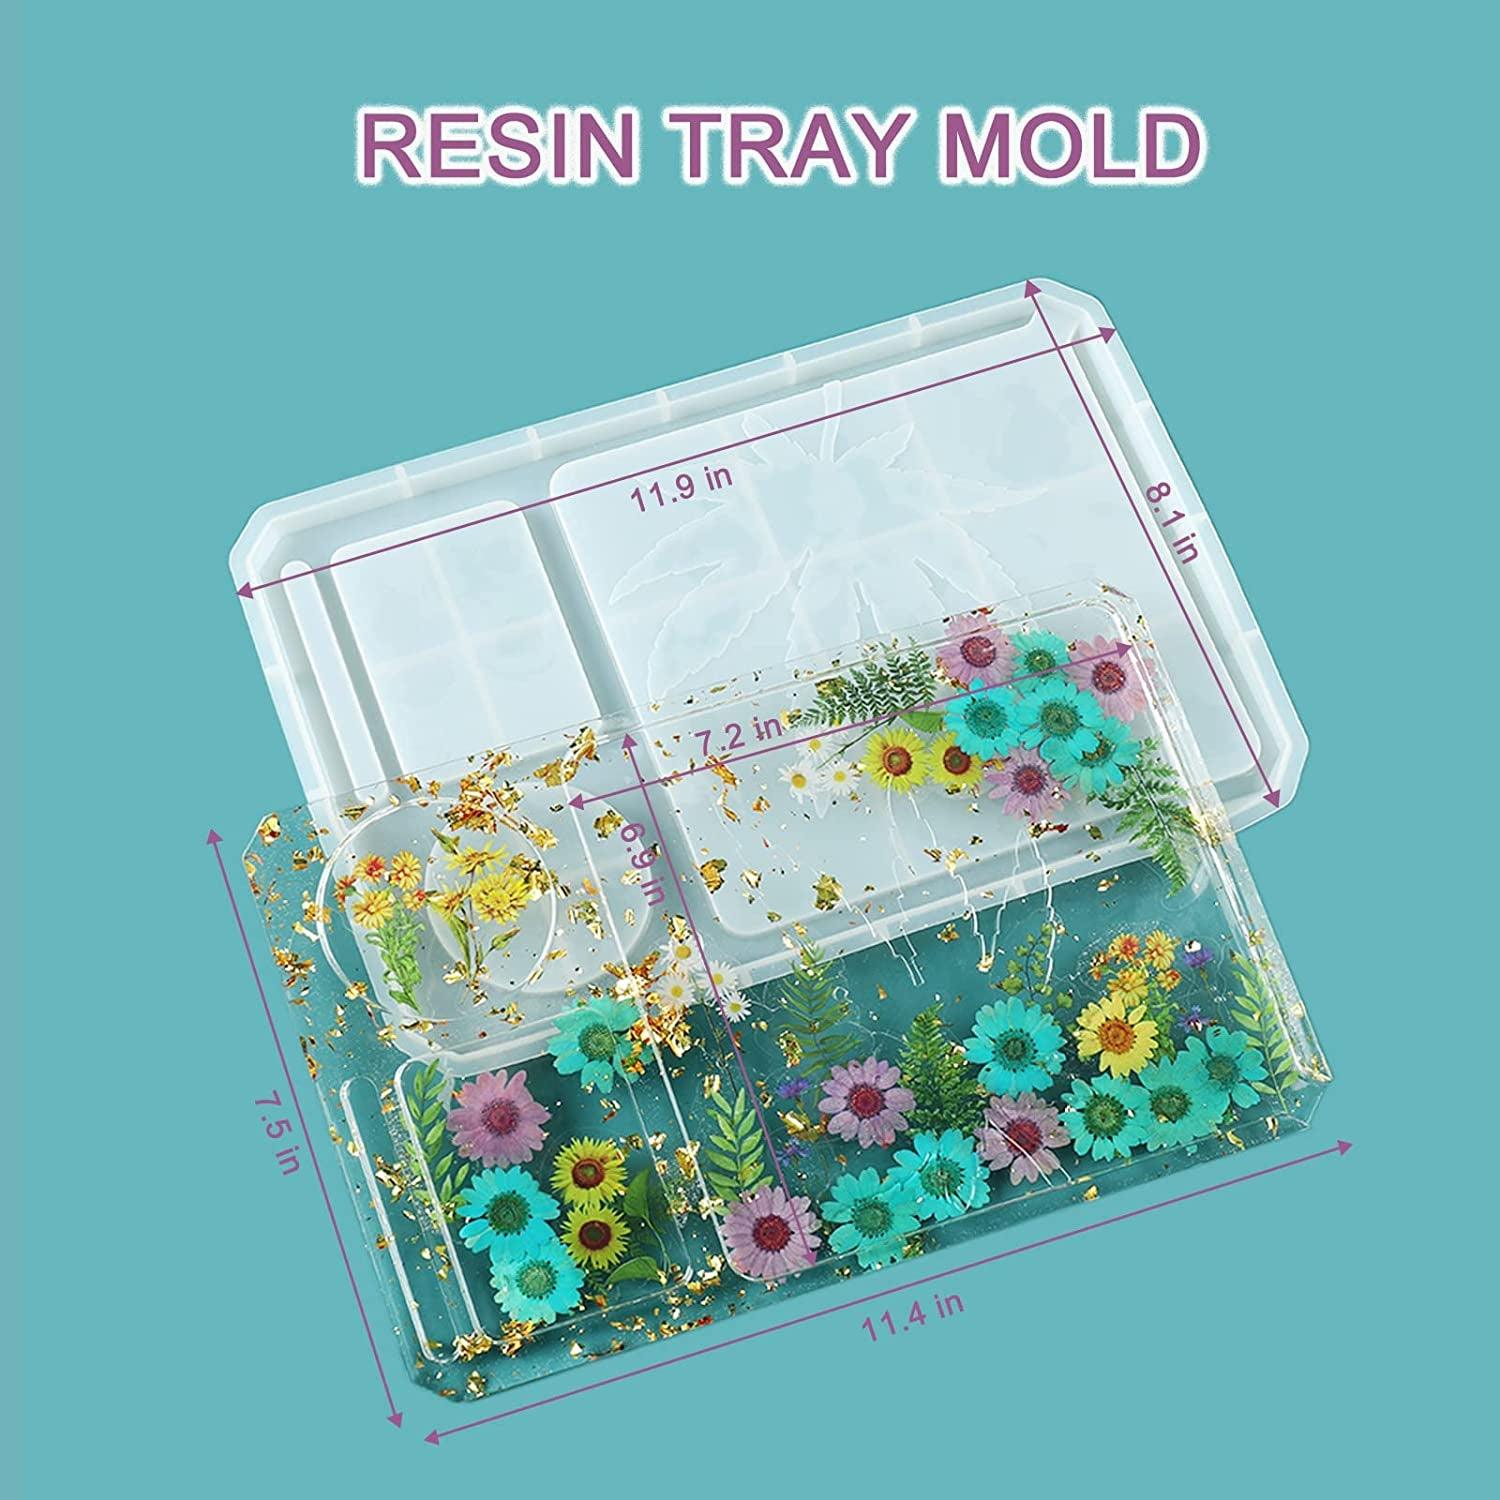 Roll up Tray Mold Resin, Rolling Tray Mold, Candle Holder, Jewelry Storage  Box, Weed Grinder, Home Decoration, Casting Crafts Epoxy Resin 